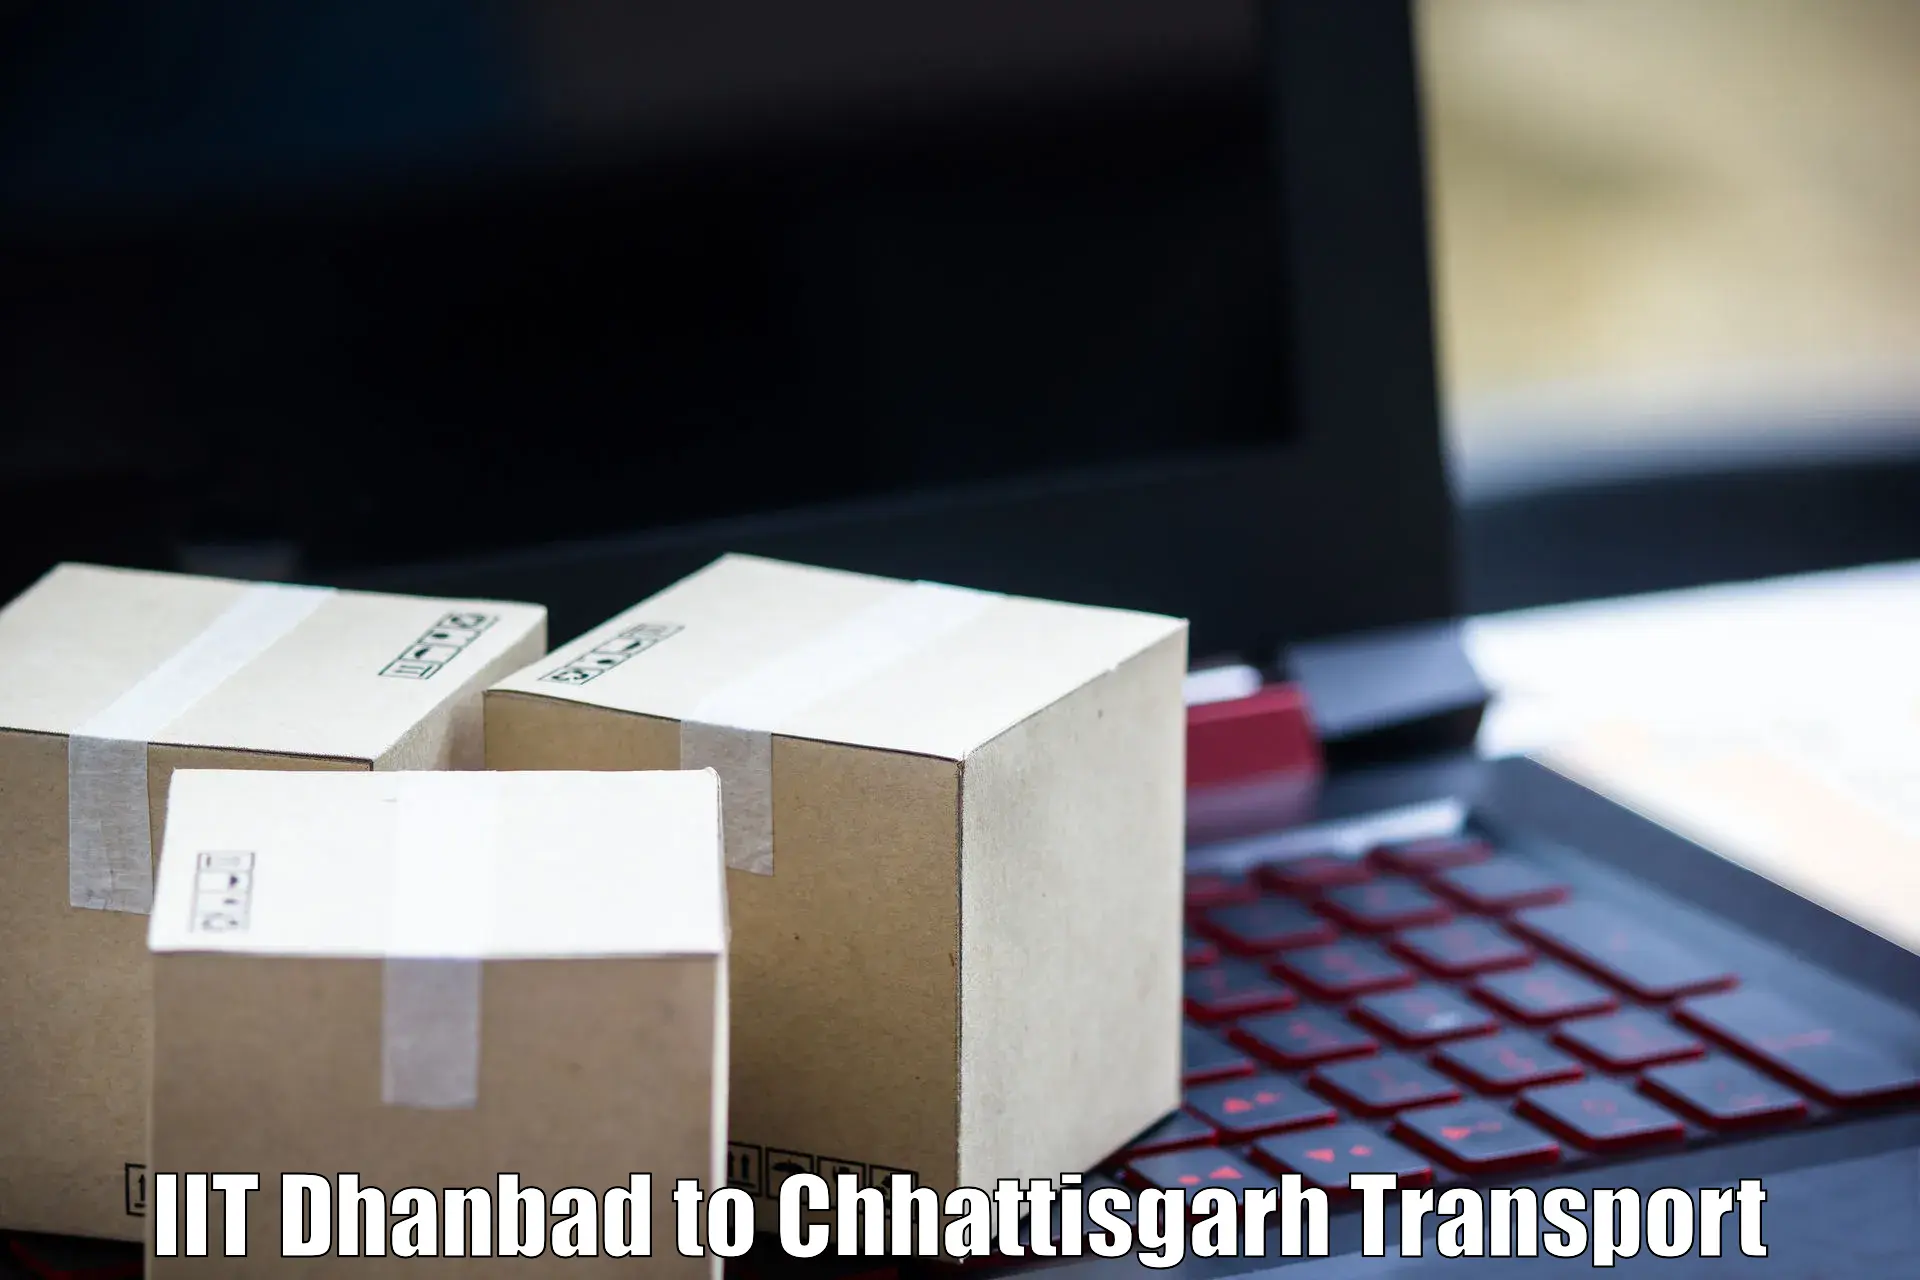 Express transport services in IIT Dhanbad to Baloda Bazar